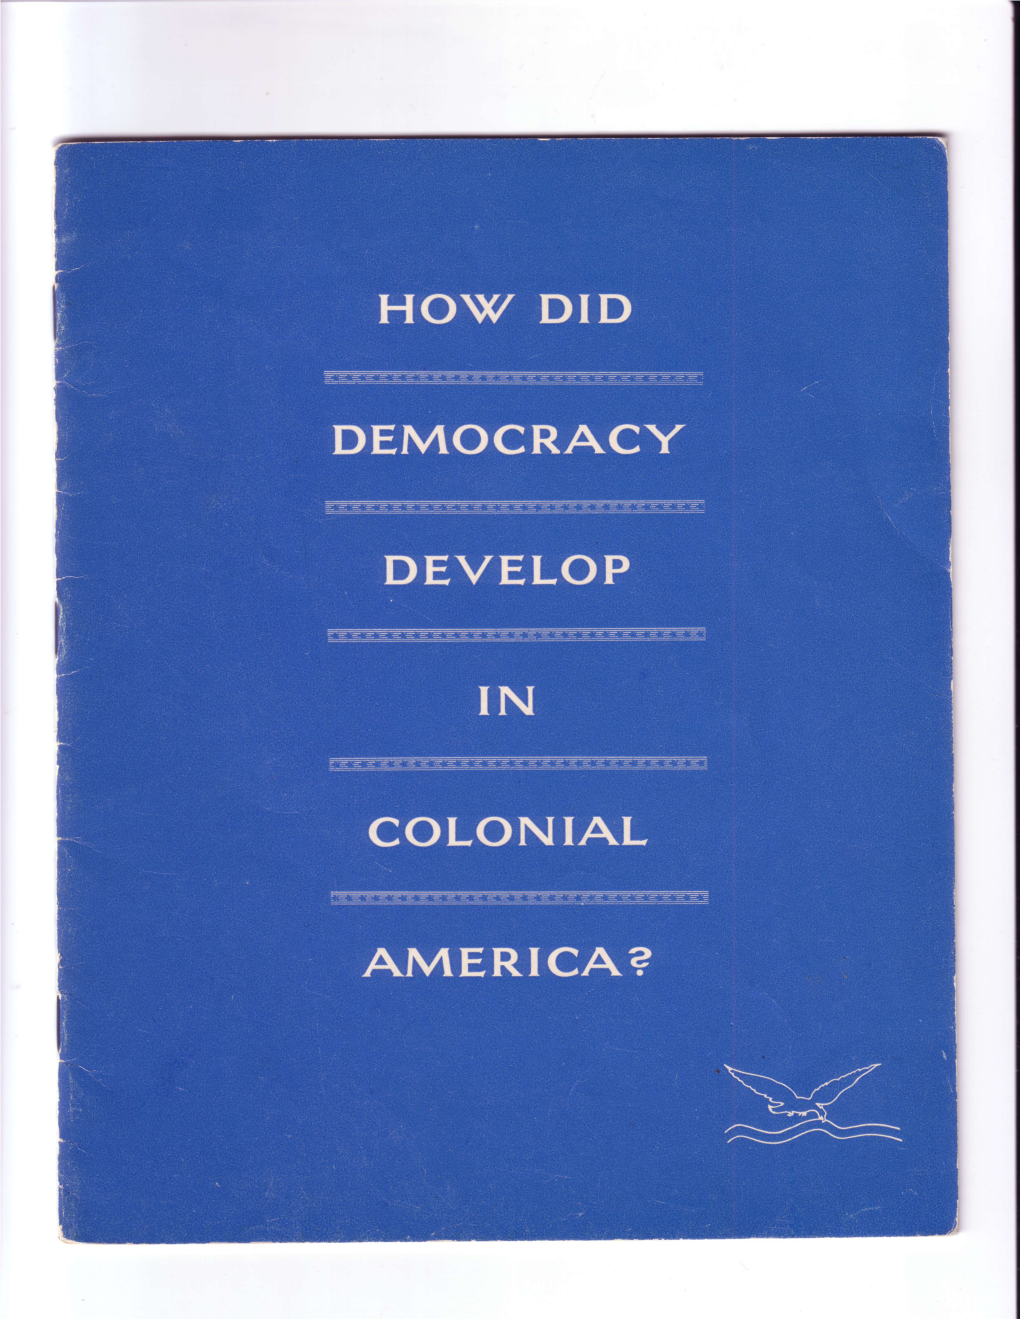 How DID Democracy Develop Rn Colonial Another Be Chosen, and There Be Six Your Good